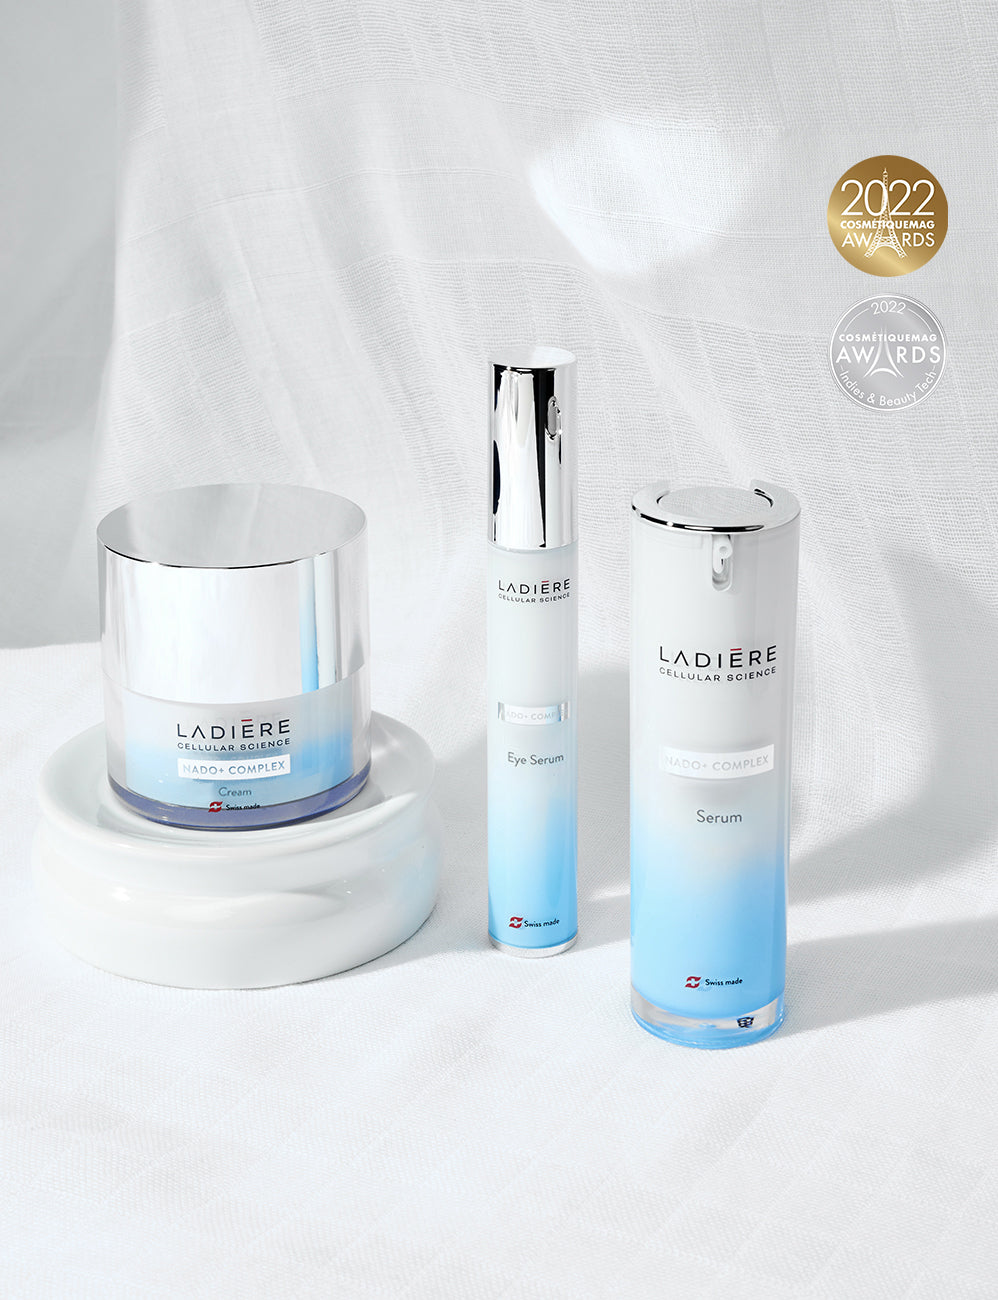 THE LADIÈRE EXPERIENCE - 3 PRODUCTS